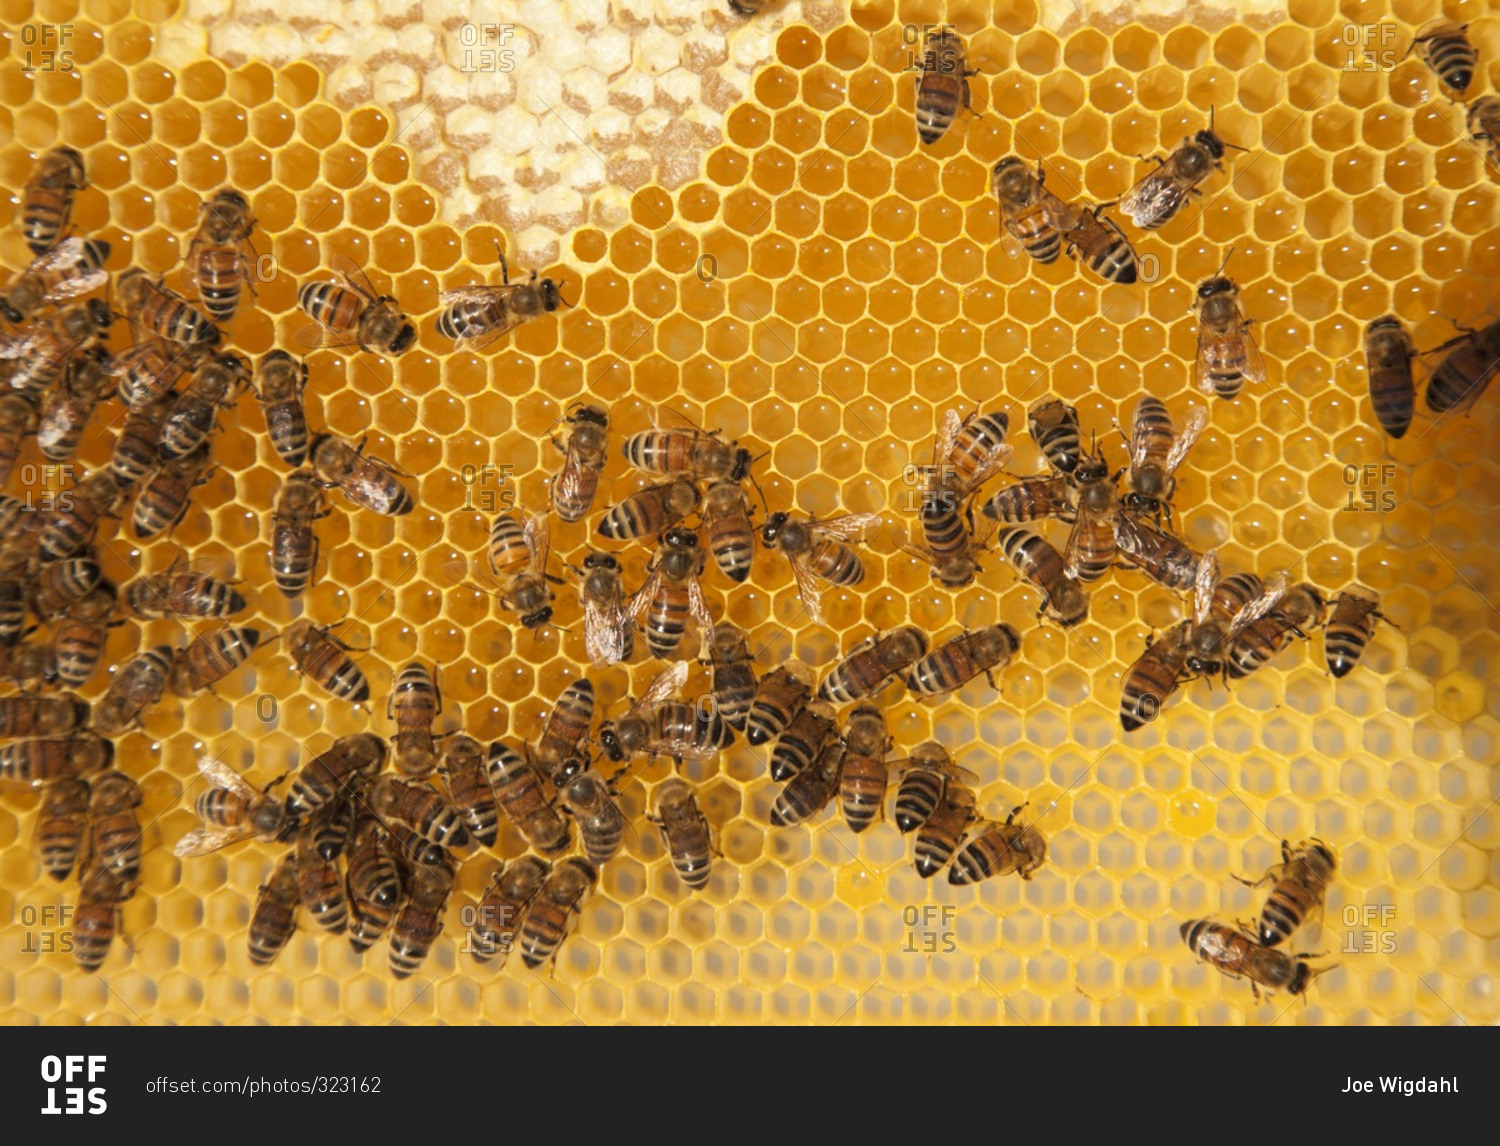 Bees making honey on a honeycomb